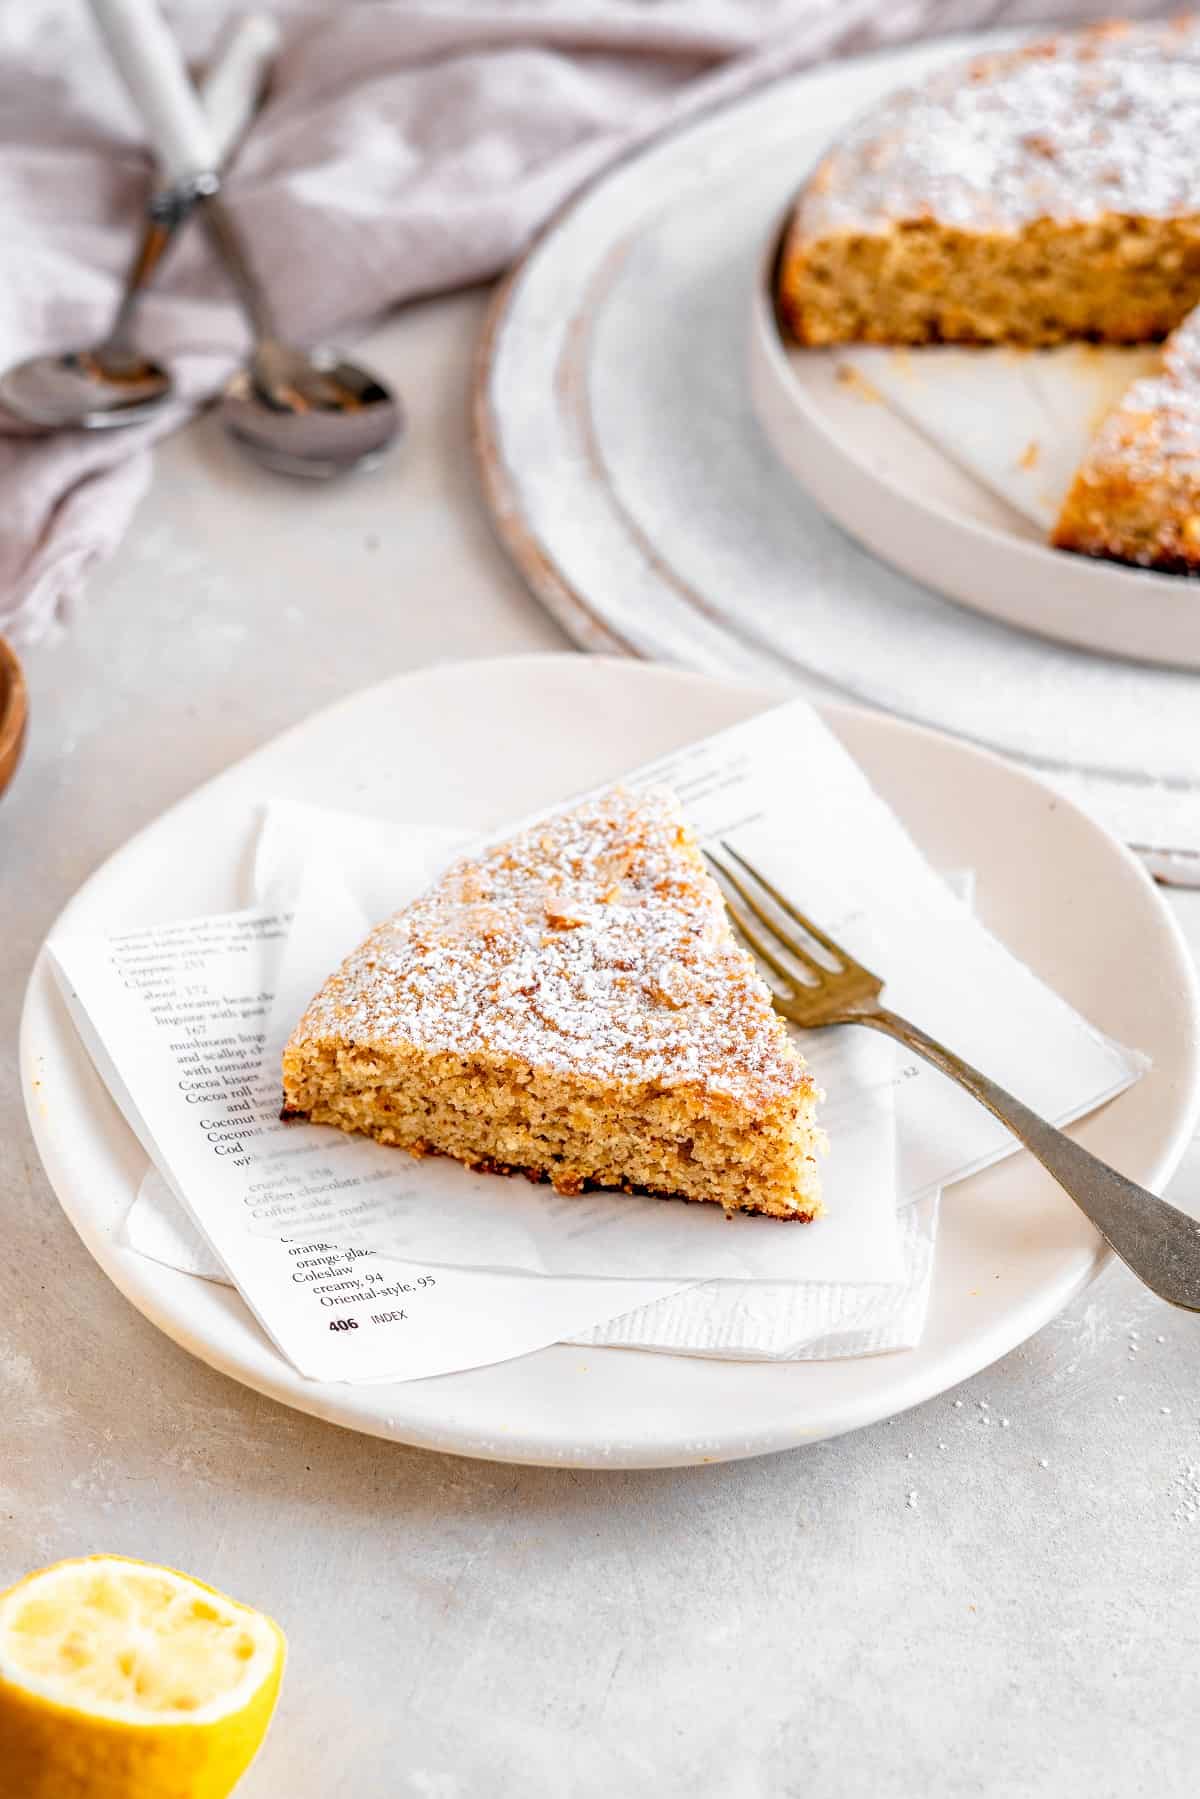 https://www.ketoconnect.net/wp-content/uploads/2021/06/angled-shot-of-a-piece-of-almond-flour-cake.jpg